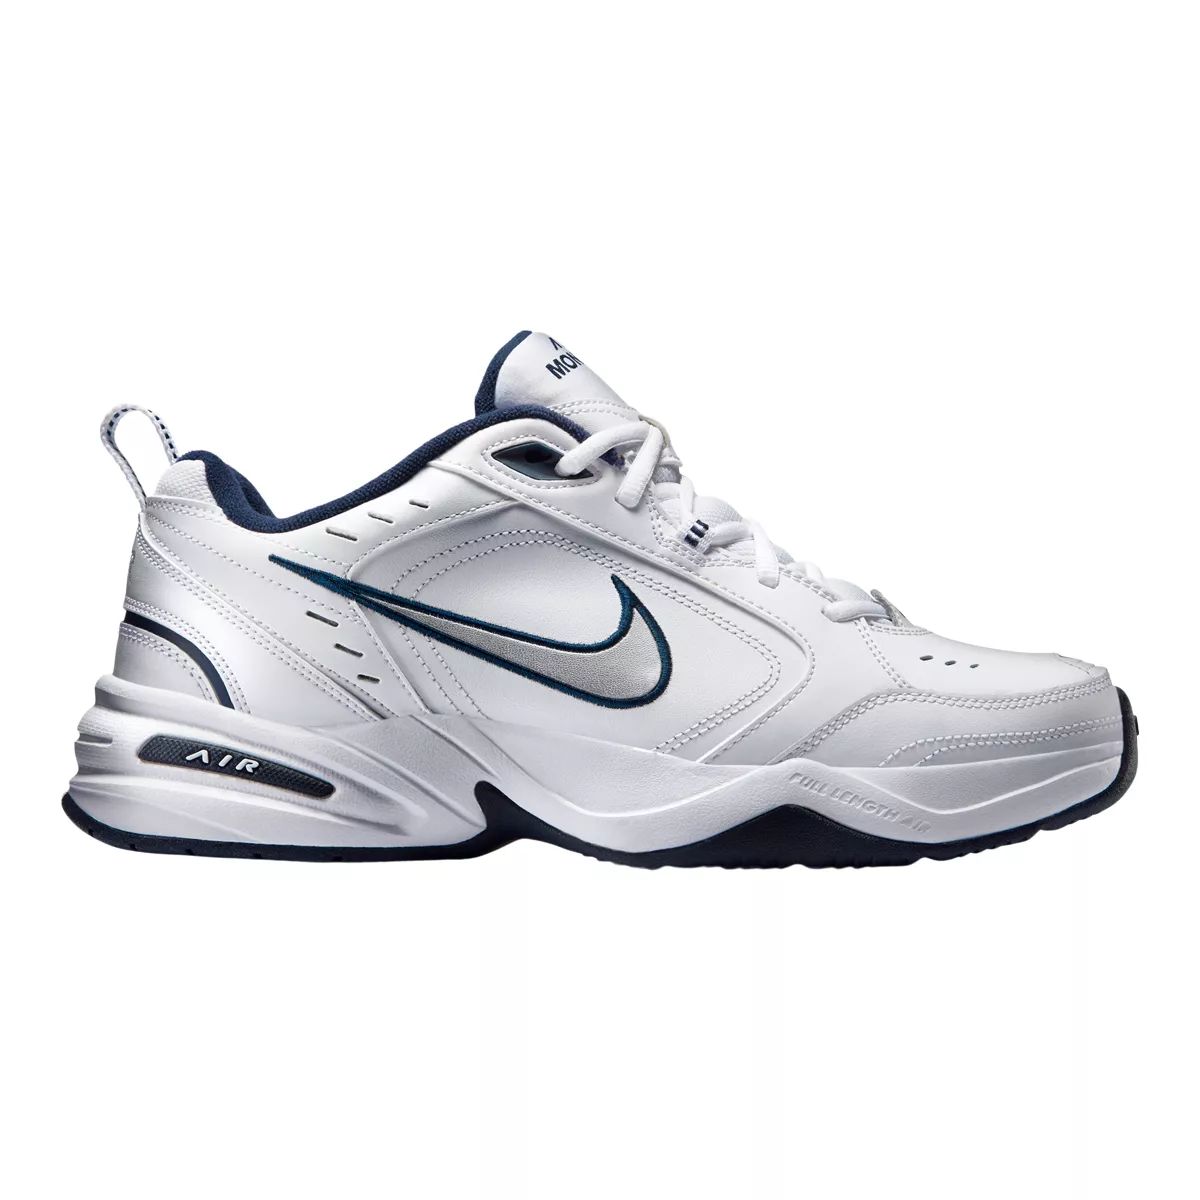 Nike Air Monarch IV sneakers in white